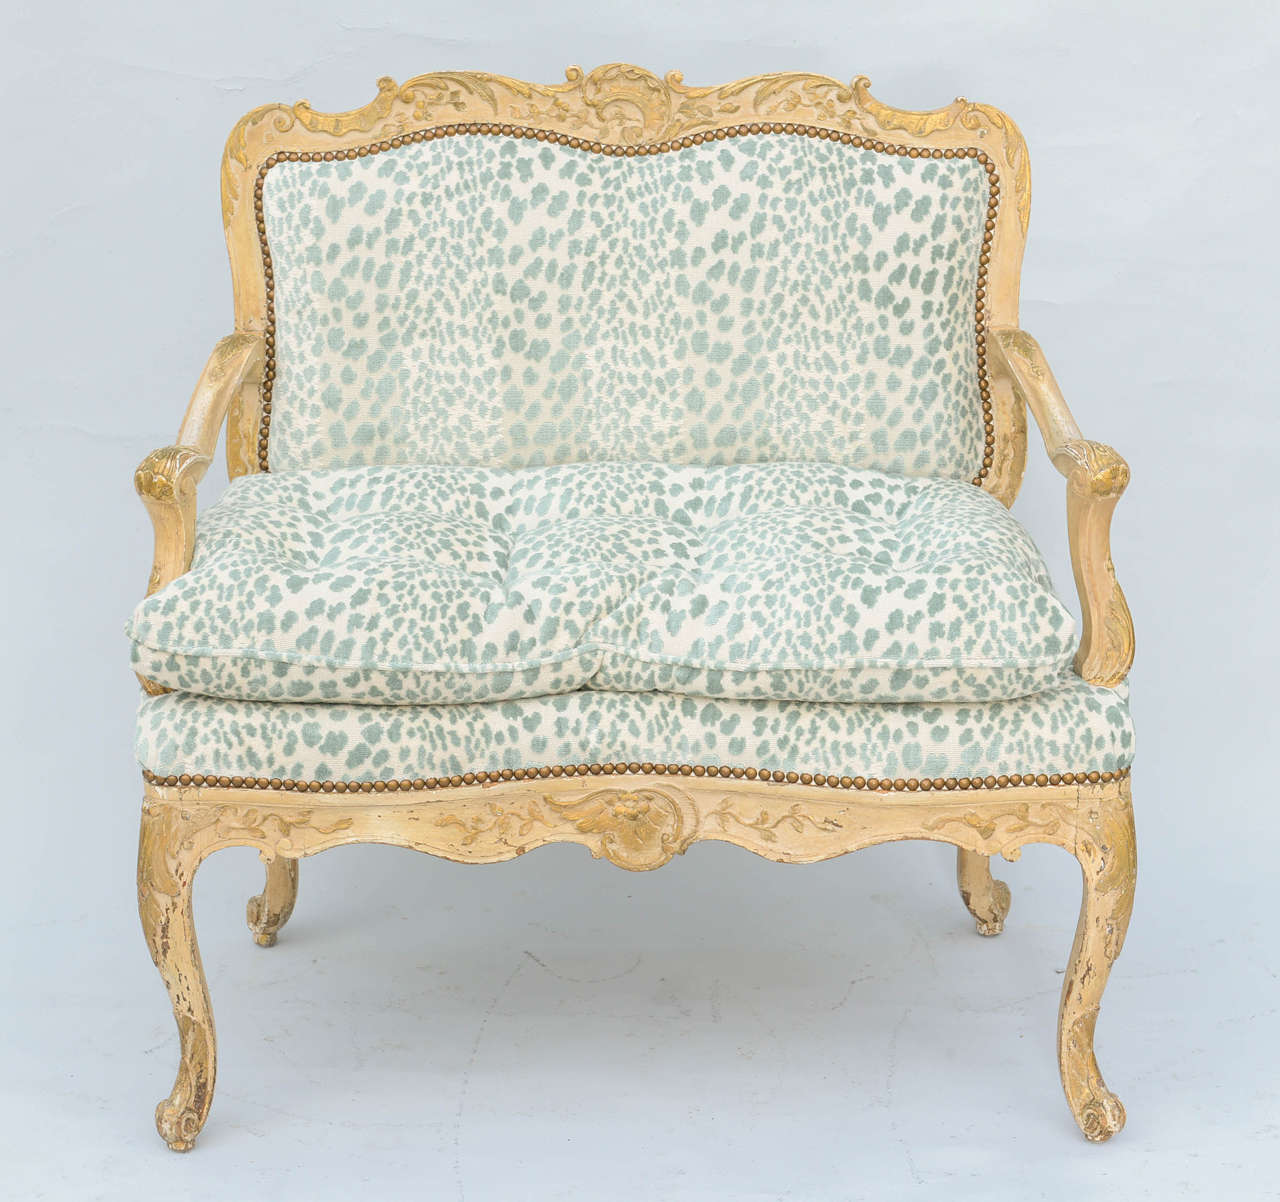 Small settee or loveseat, having a painted and parcel gilt frame, finely carved with foliate and scrollwork, with natural wear; its scroll armrests raised on downswept terminals, padded seat holding a loose down-filled cushion, similarly carved